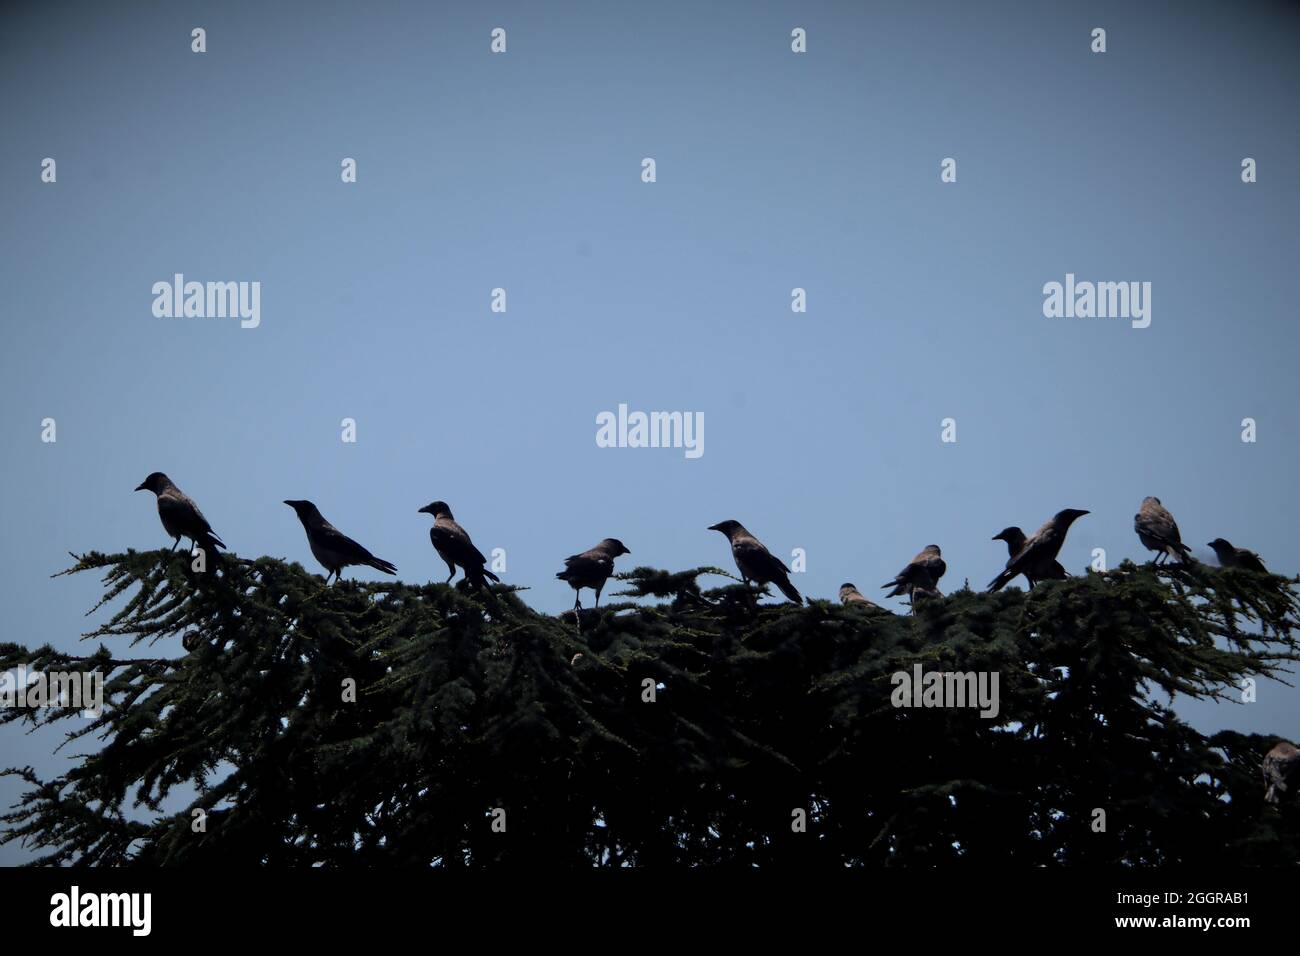 A large group of crows sits on a cut fir tree in the sunset. Creepy atmosphere Stock Photo